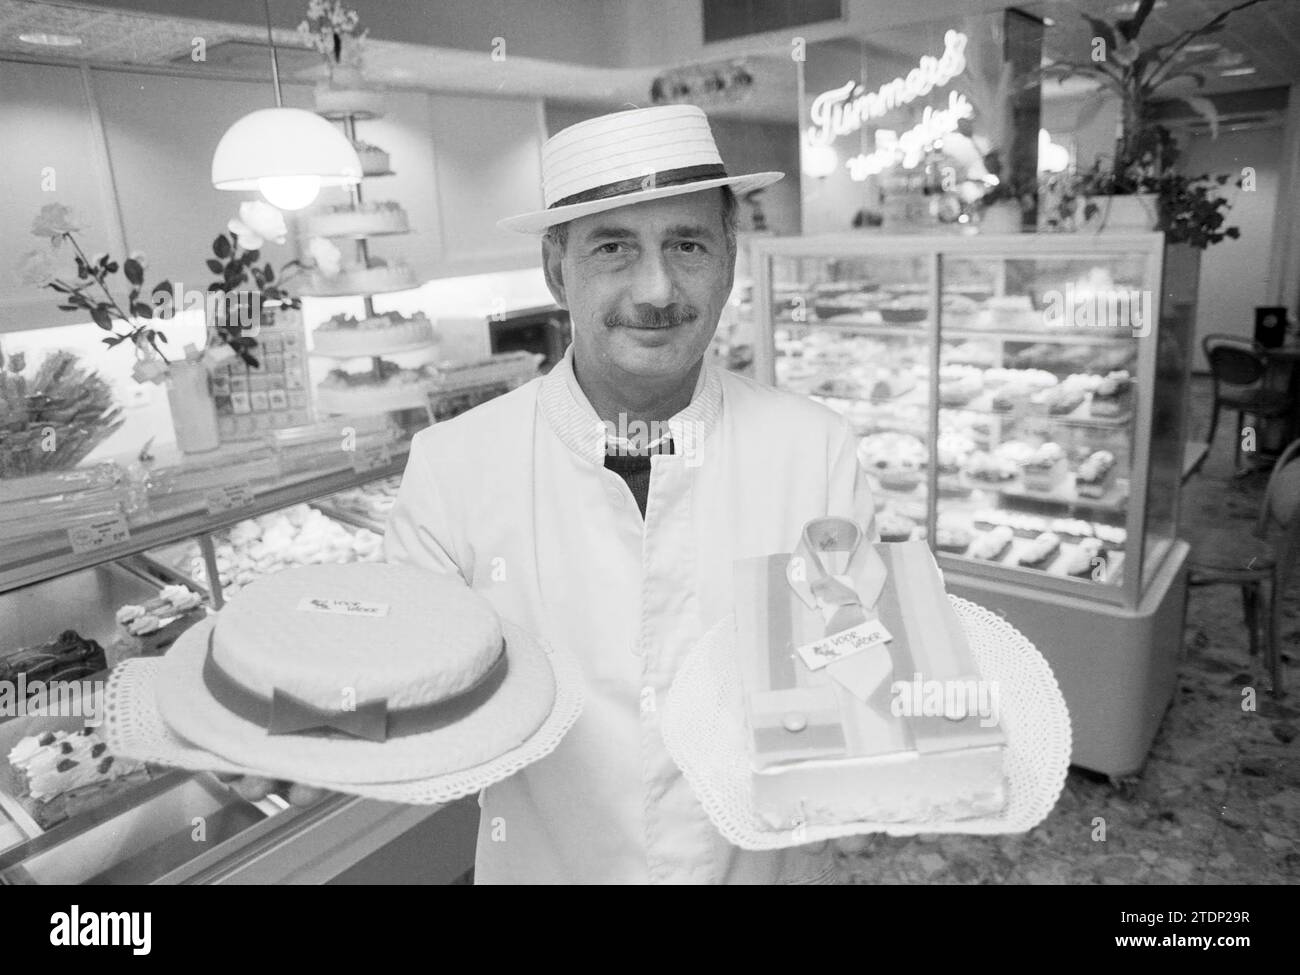 Pastry chef Tummers, Heemstede, The Netherlands, 12-06-1990, Whizgle News from the Past, Tailored for the Future. Explore historical narratives, Dutch The Netherlands agency image with a modern perspective, bridging the gap between yesterday's events and tomorrow's insights. A timeless journey shaping the stories that shape our future Stock Photo